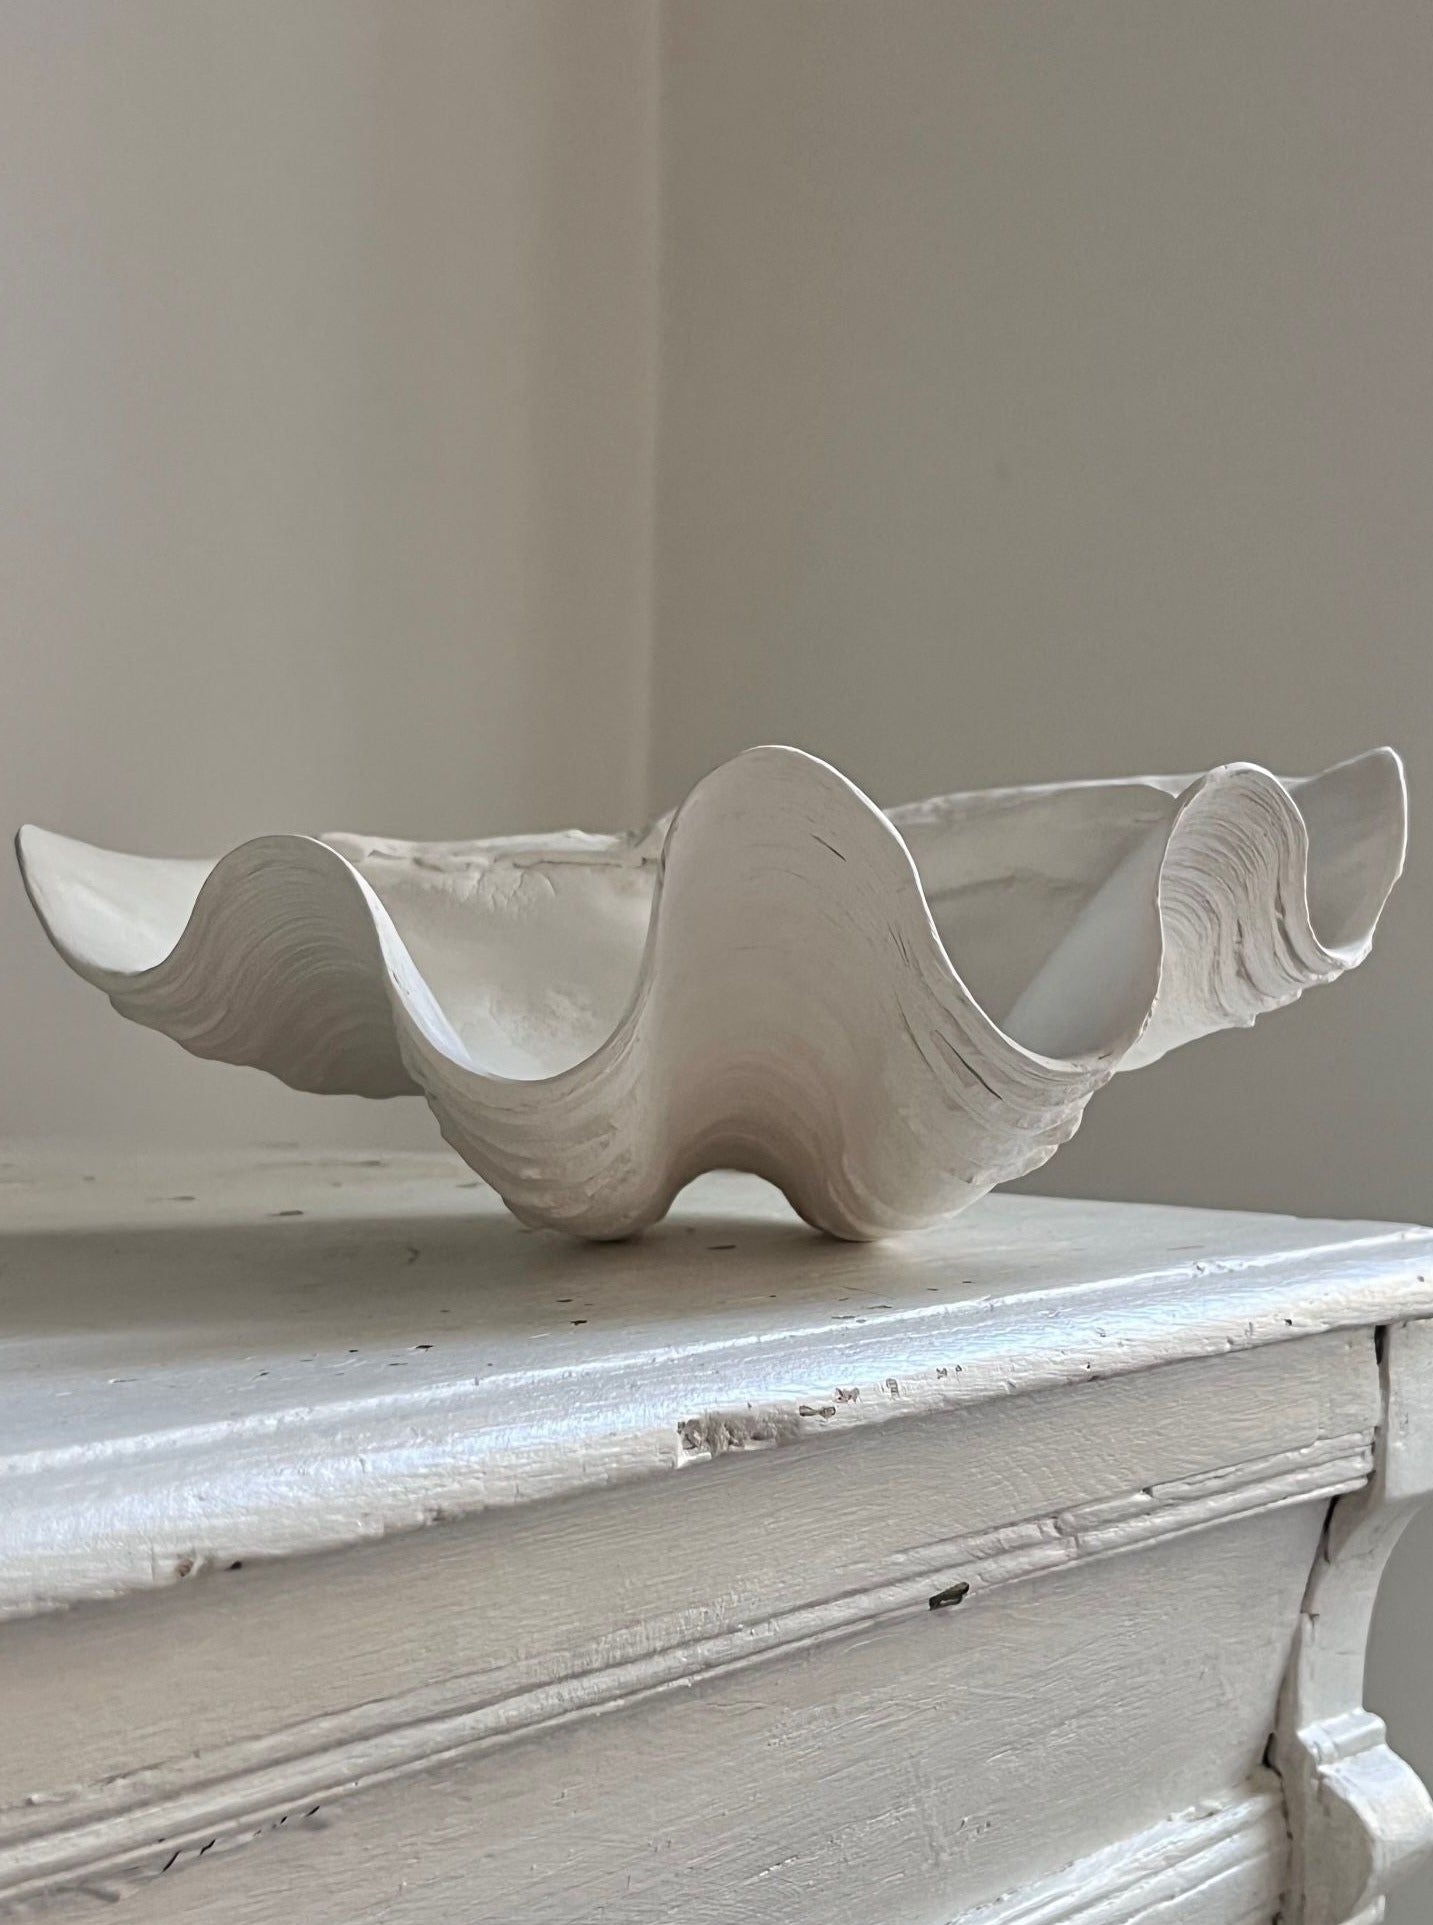 A wavy, sculptural ceramic Médecine clam shell bowl with flowing edges, displayed on a faded white wooden table against a neutral wall background.